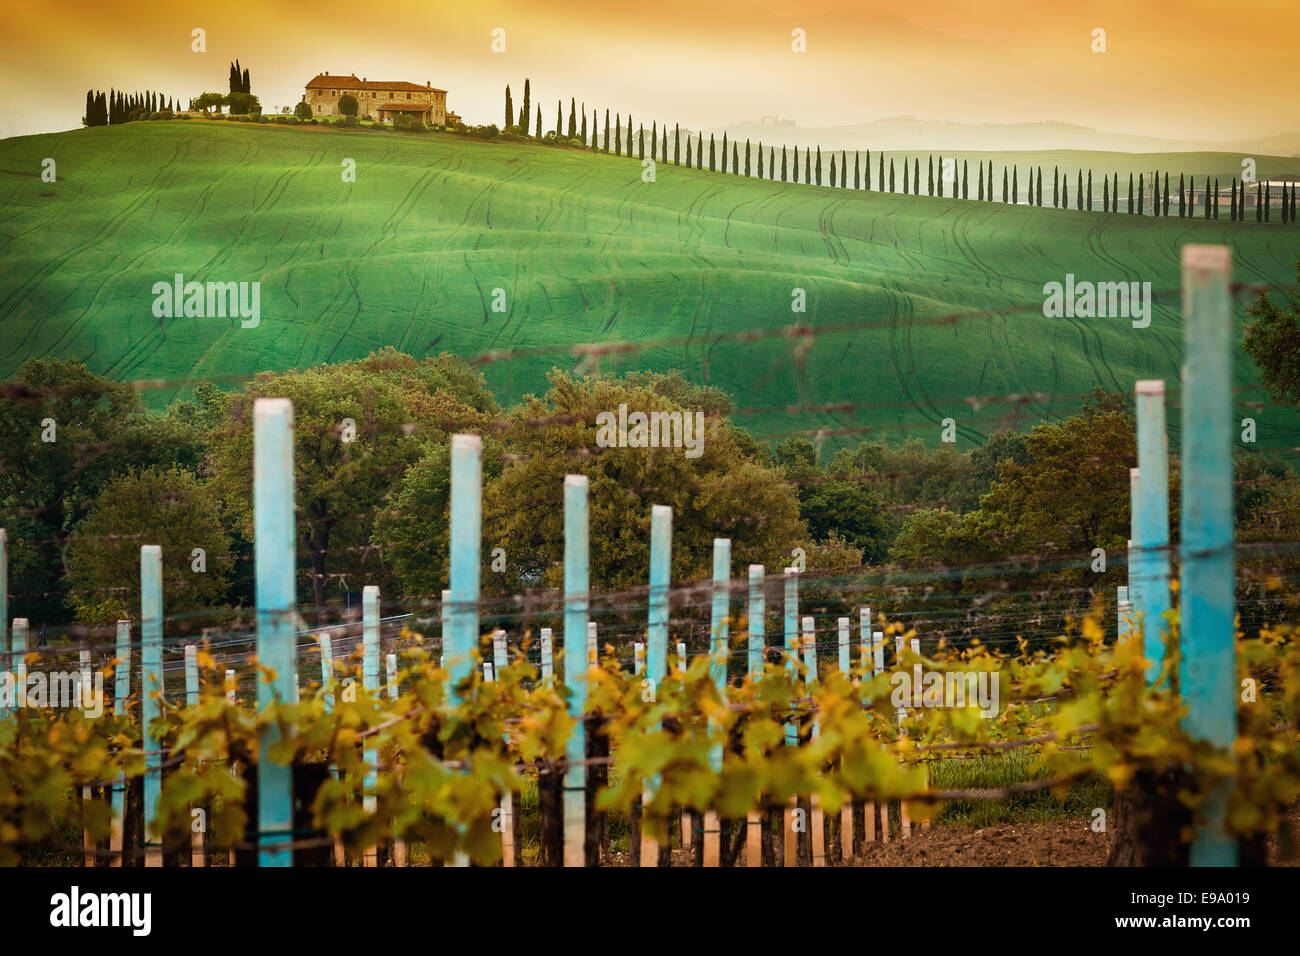 Rural countryside in Italy region of Tuscany Stock Photo